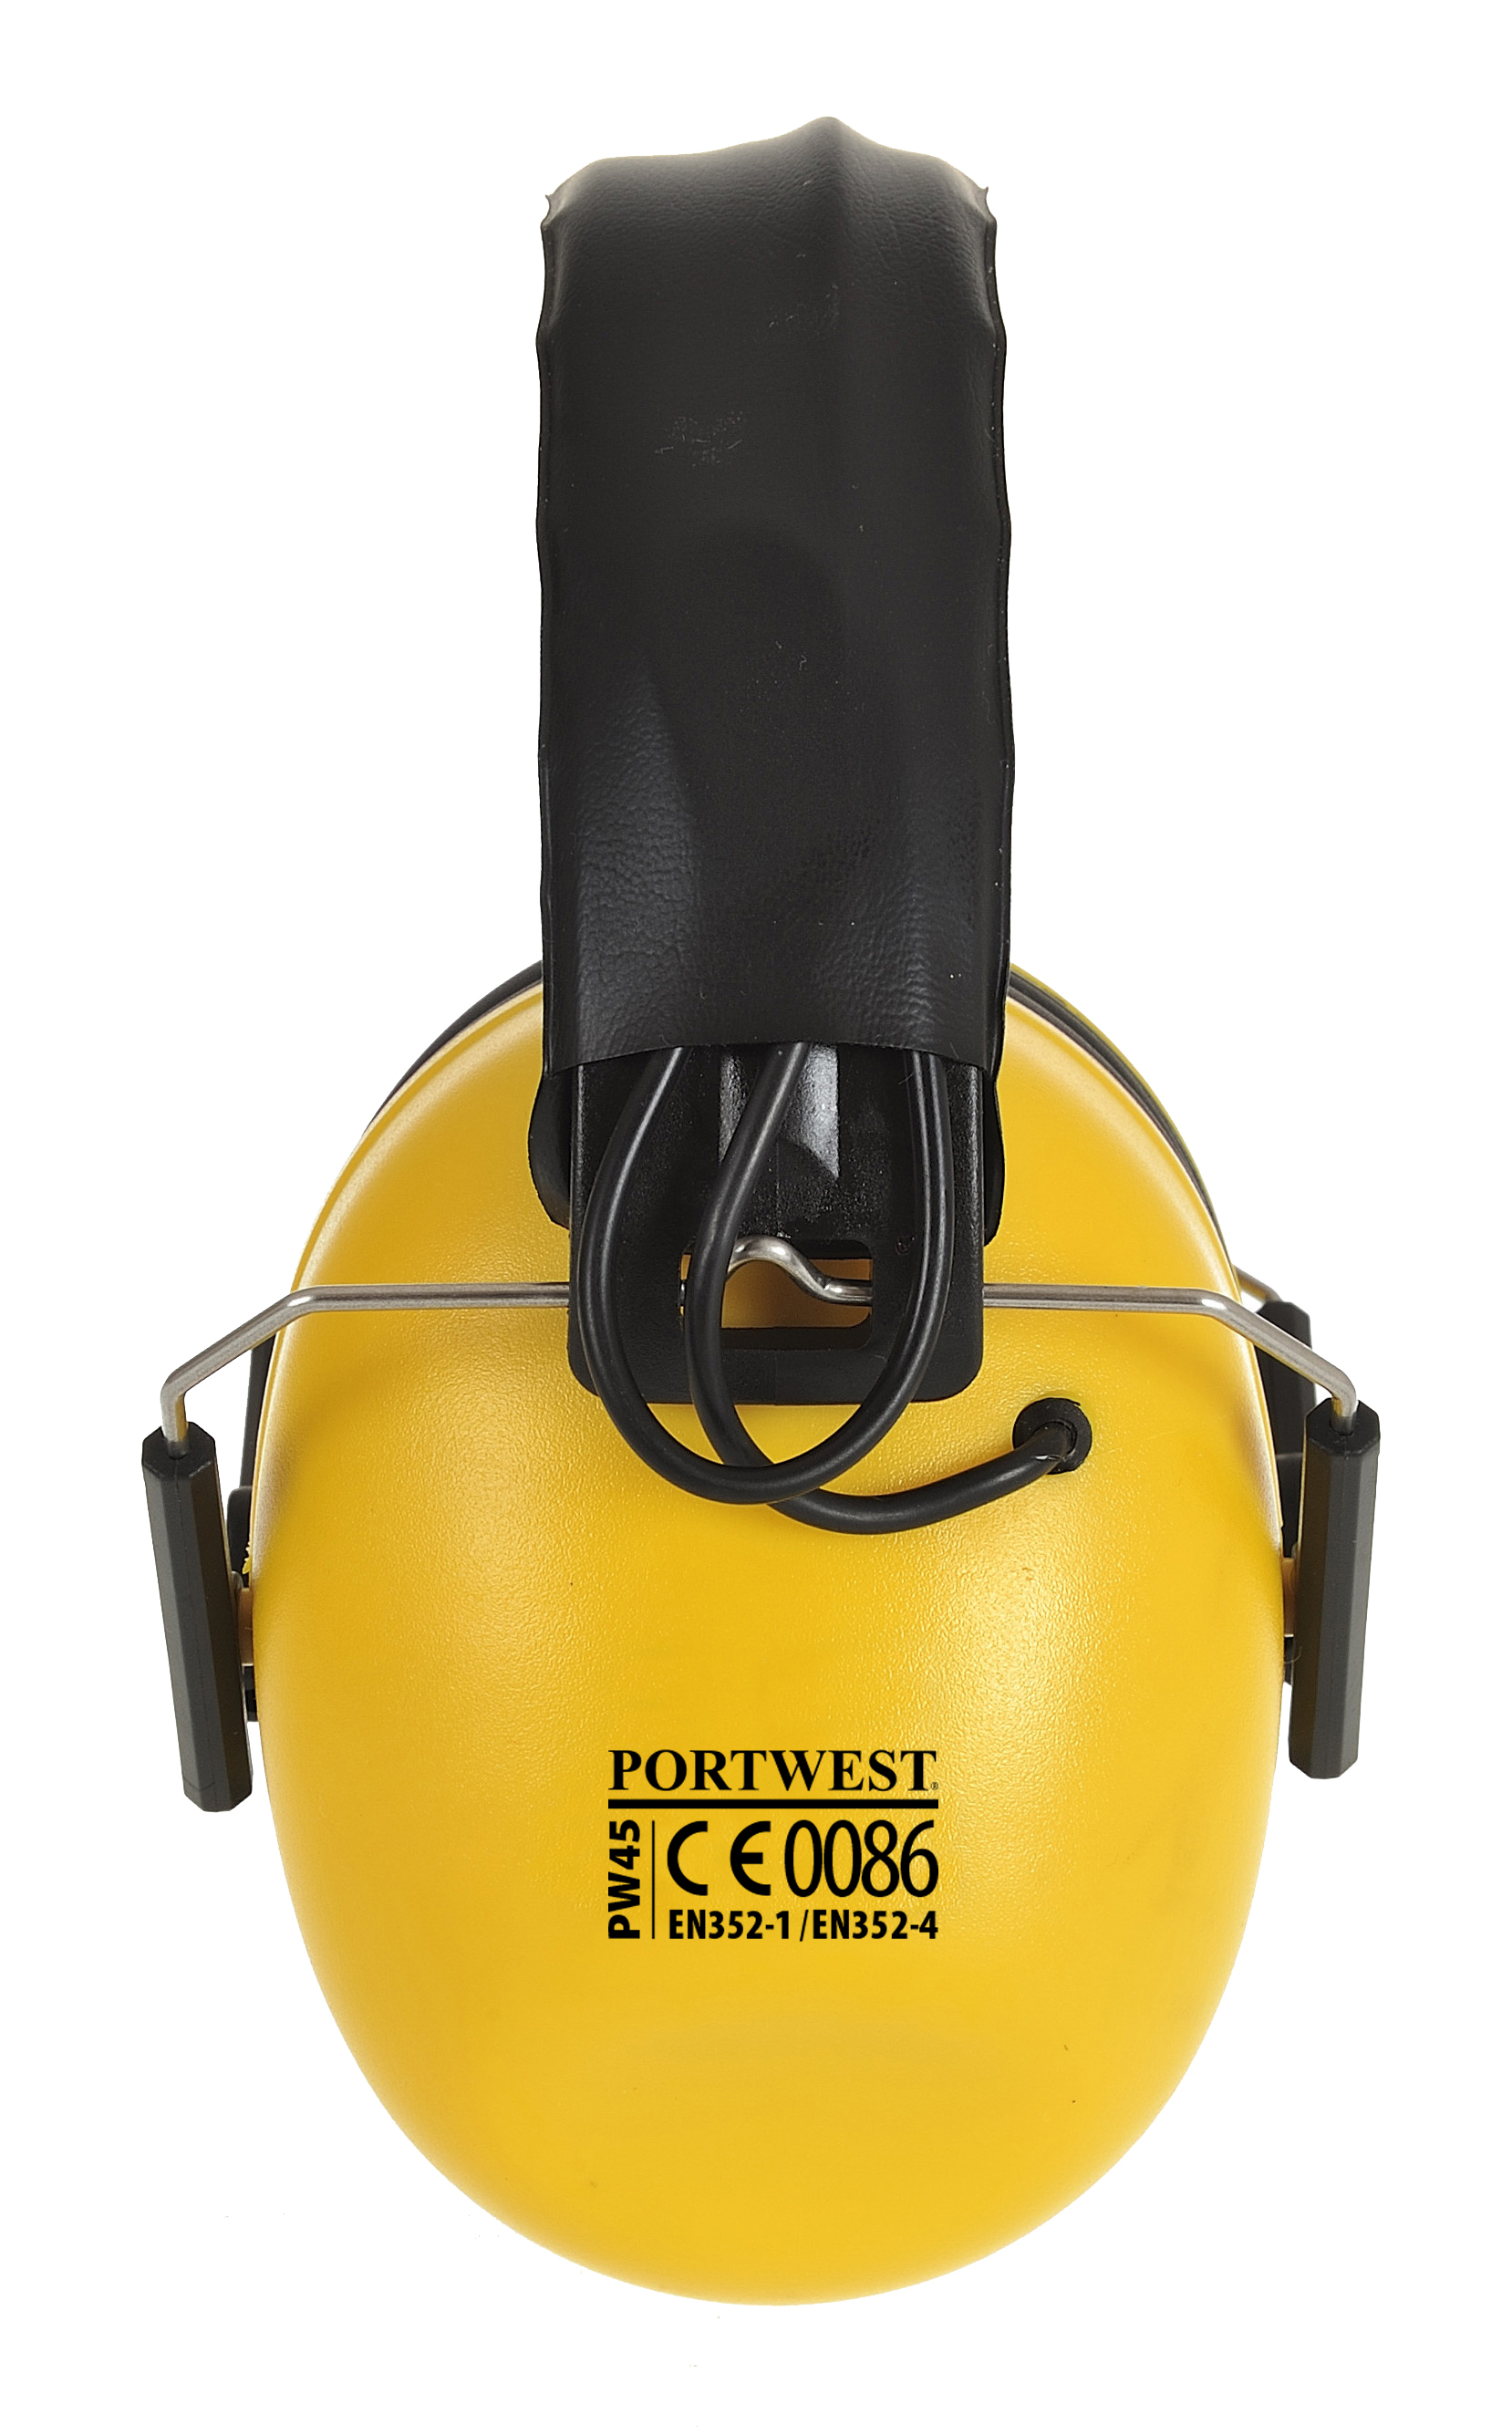 Pw45 Portwest Electronic Ear Muff